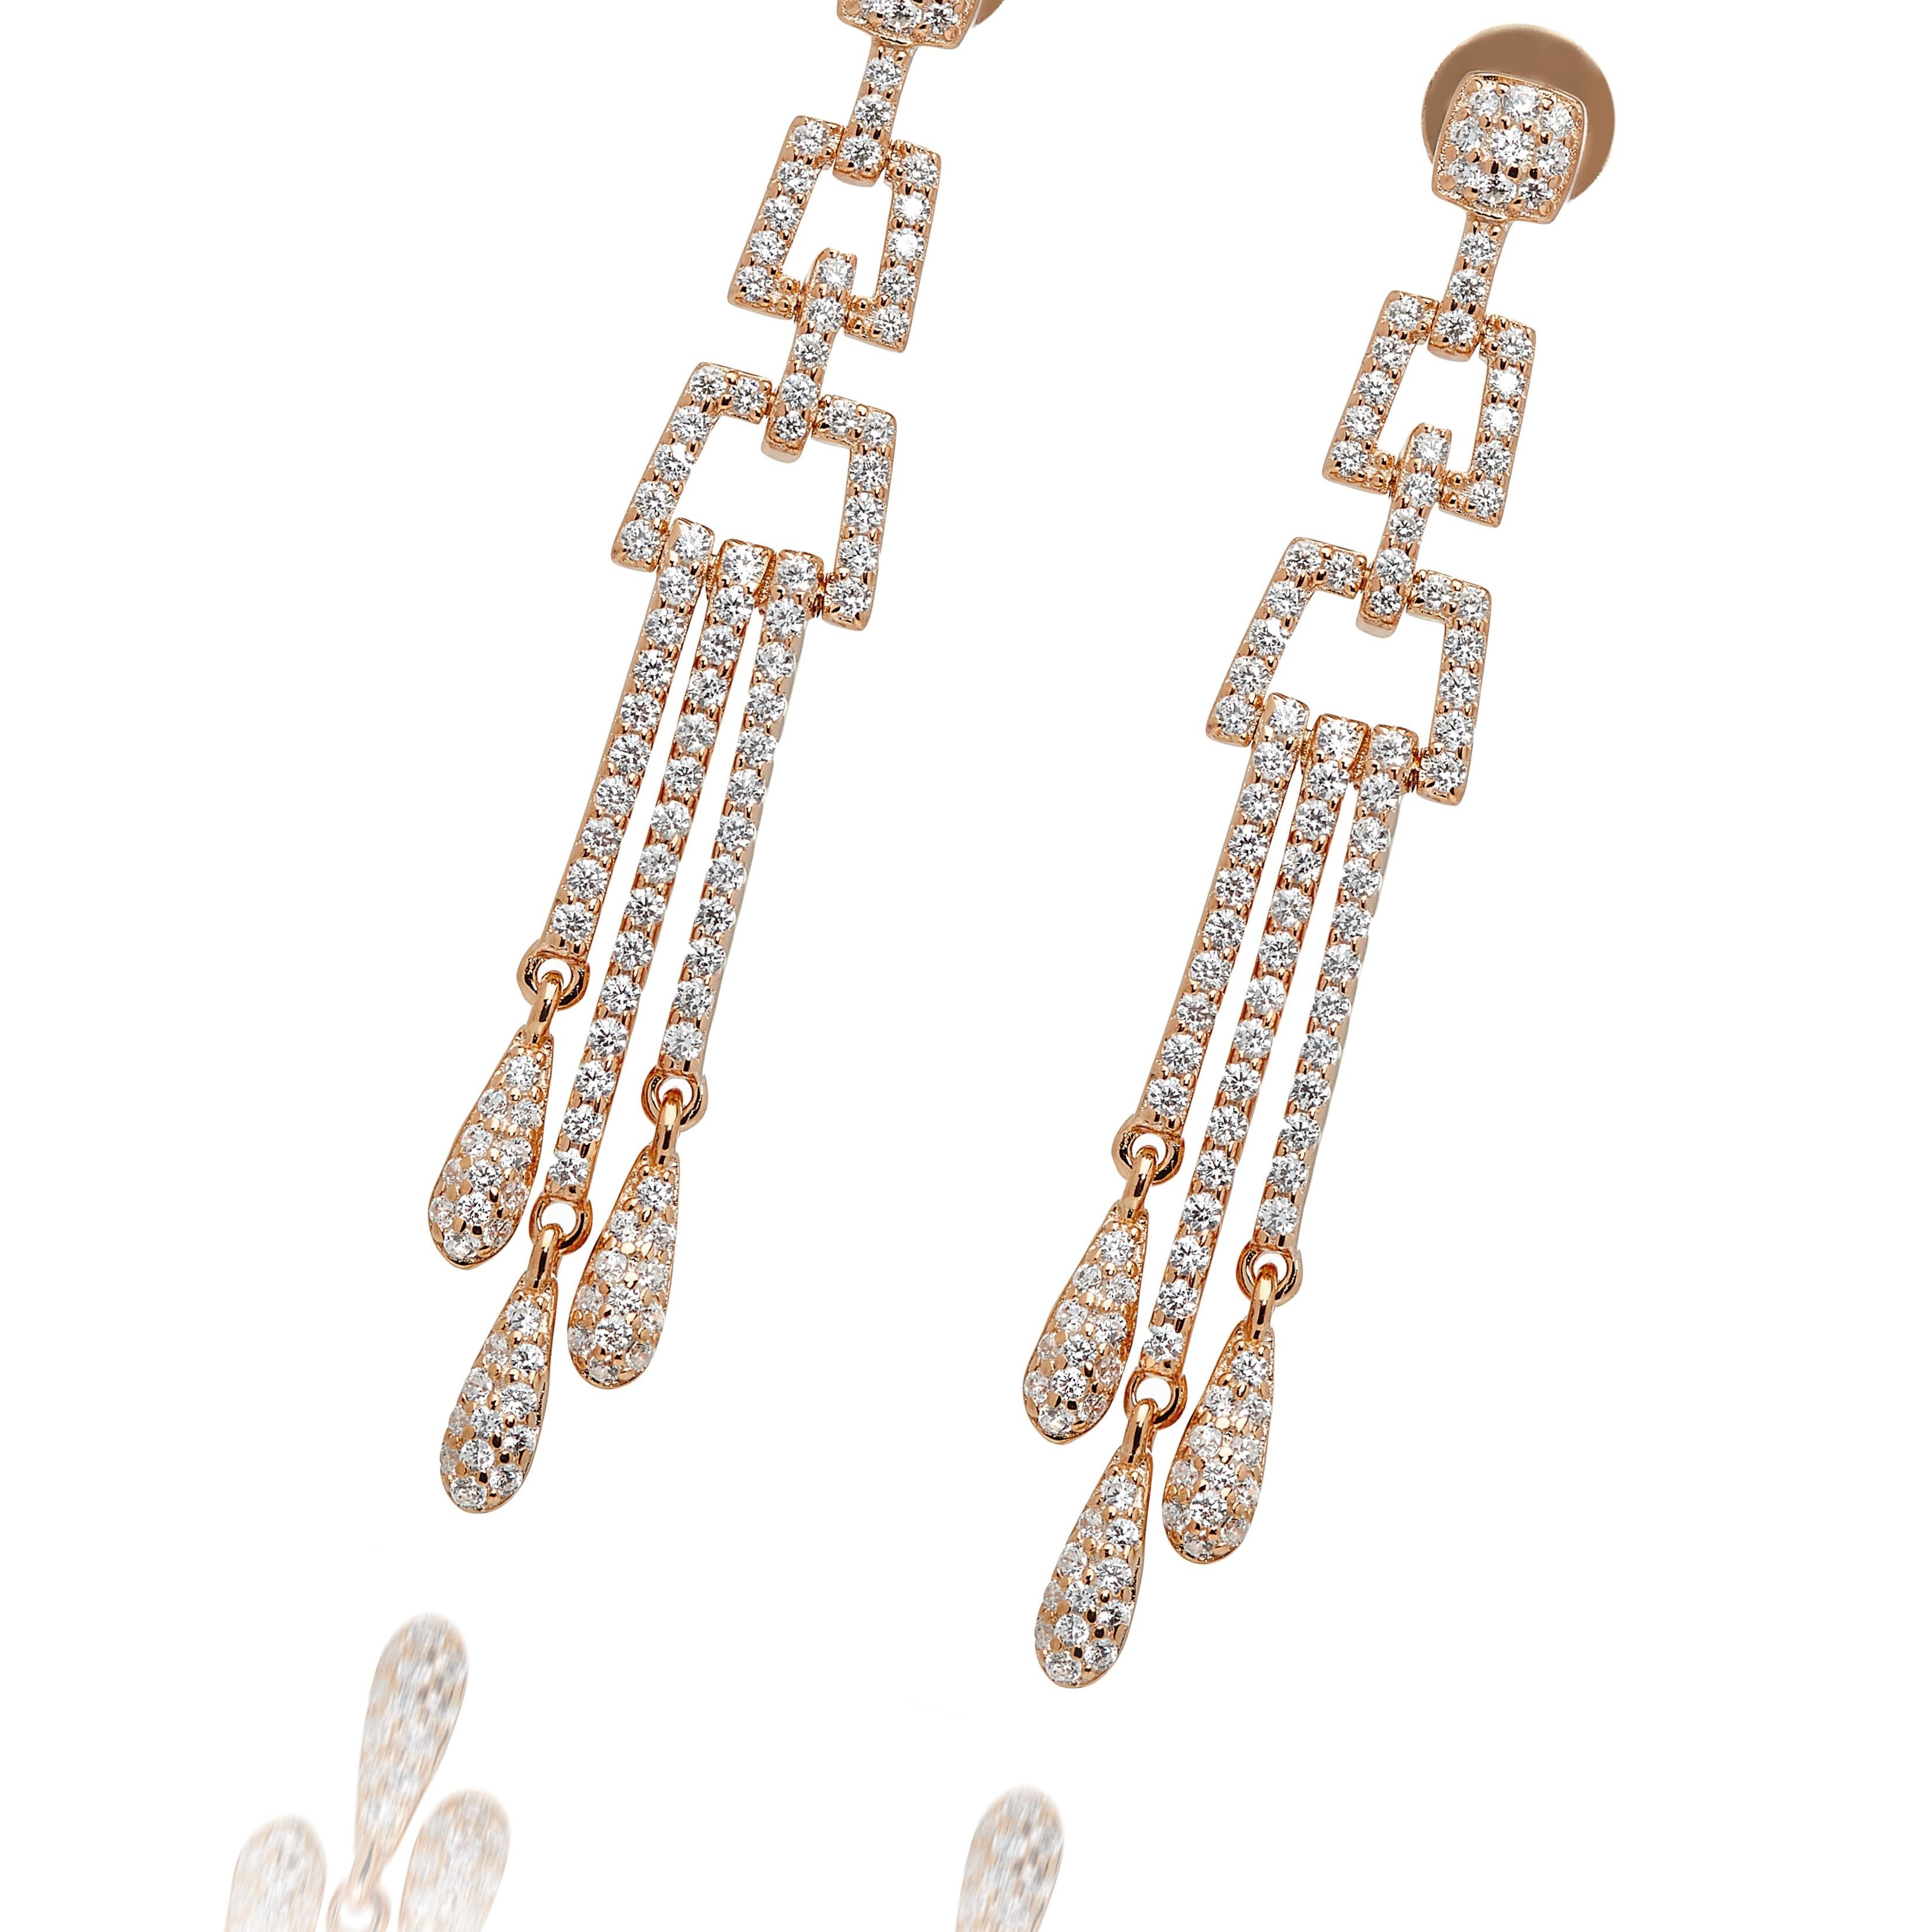 Art Deco Style Sterling Silver Hand Finished 2.6 Carat Cubic Zirconia 14 Karat Rose Gold Plated Chandelier Drop Earrings

Inspired by the geometric designs favoured in the Art Deco period, this stunning pair of earrings will transport you to another